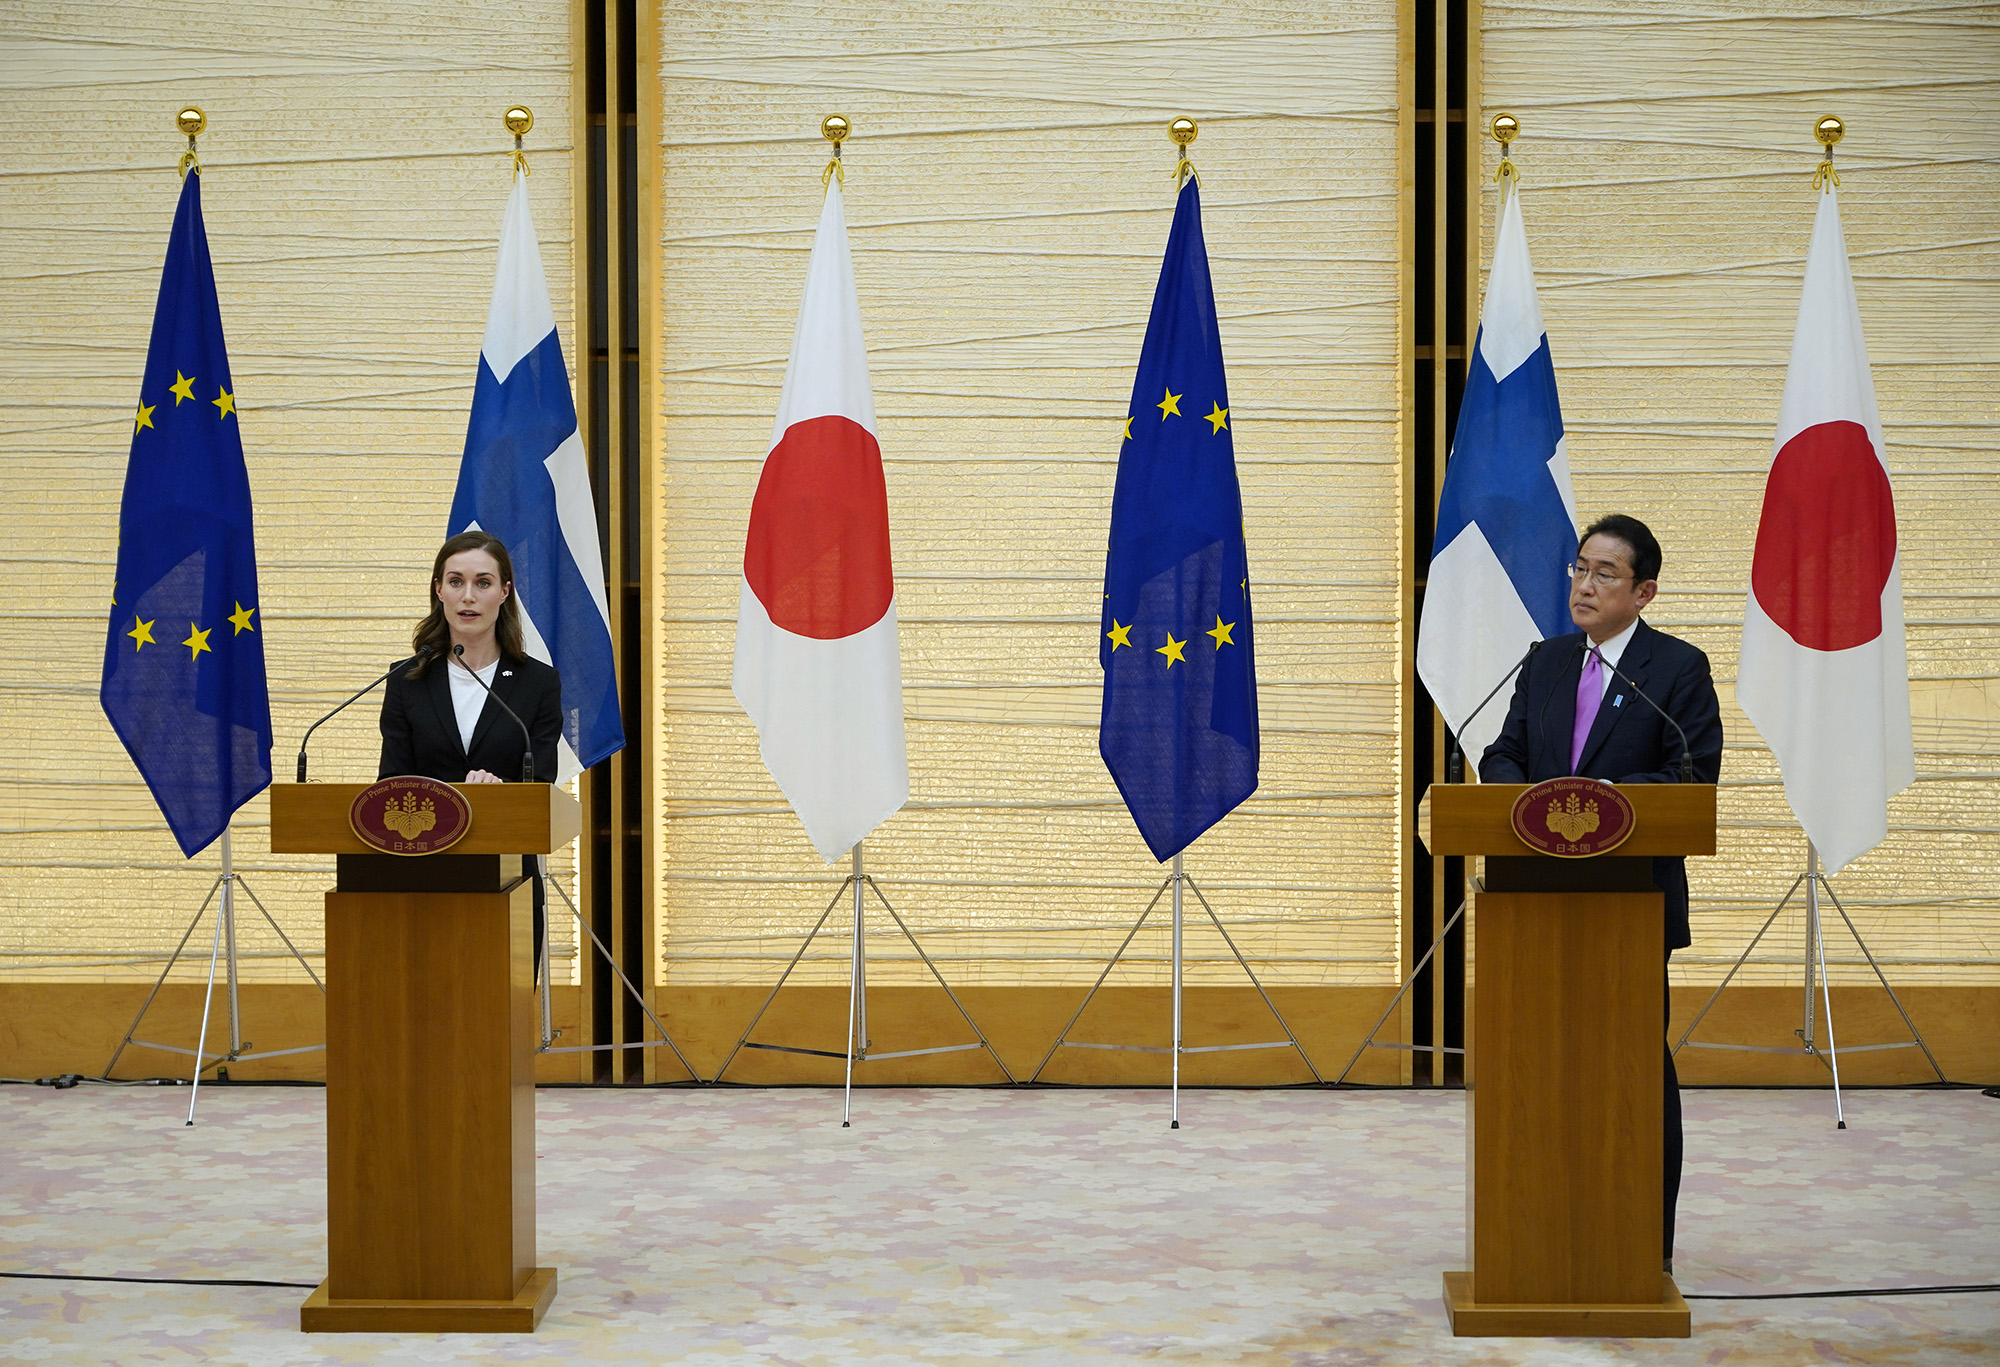 Finland's Prime Minister Sanna Marin, left, speaks next to Japan's Prime Minister Fumio Kishida during a joint press annoucement at the prime minister's official residence in Tokyo, Japan, on May 11.